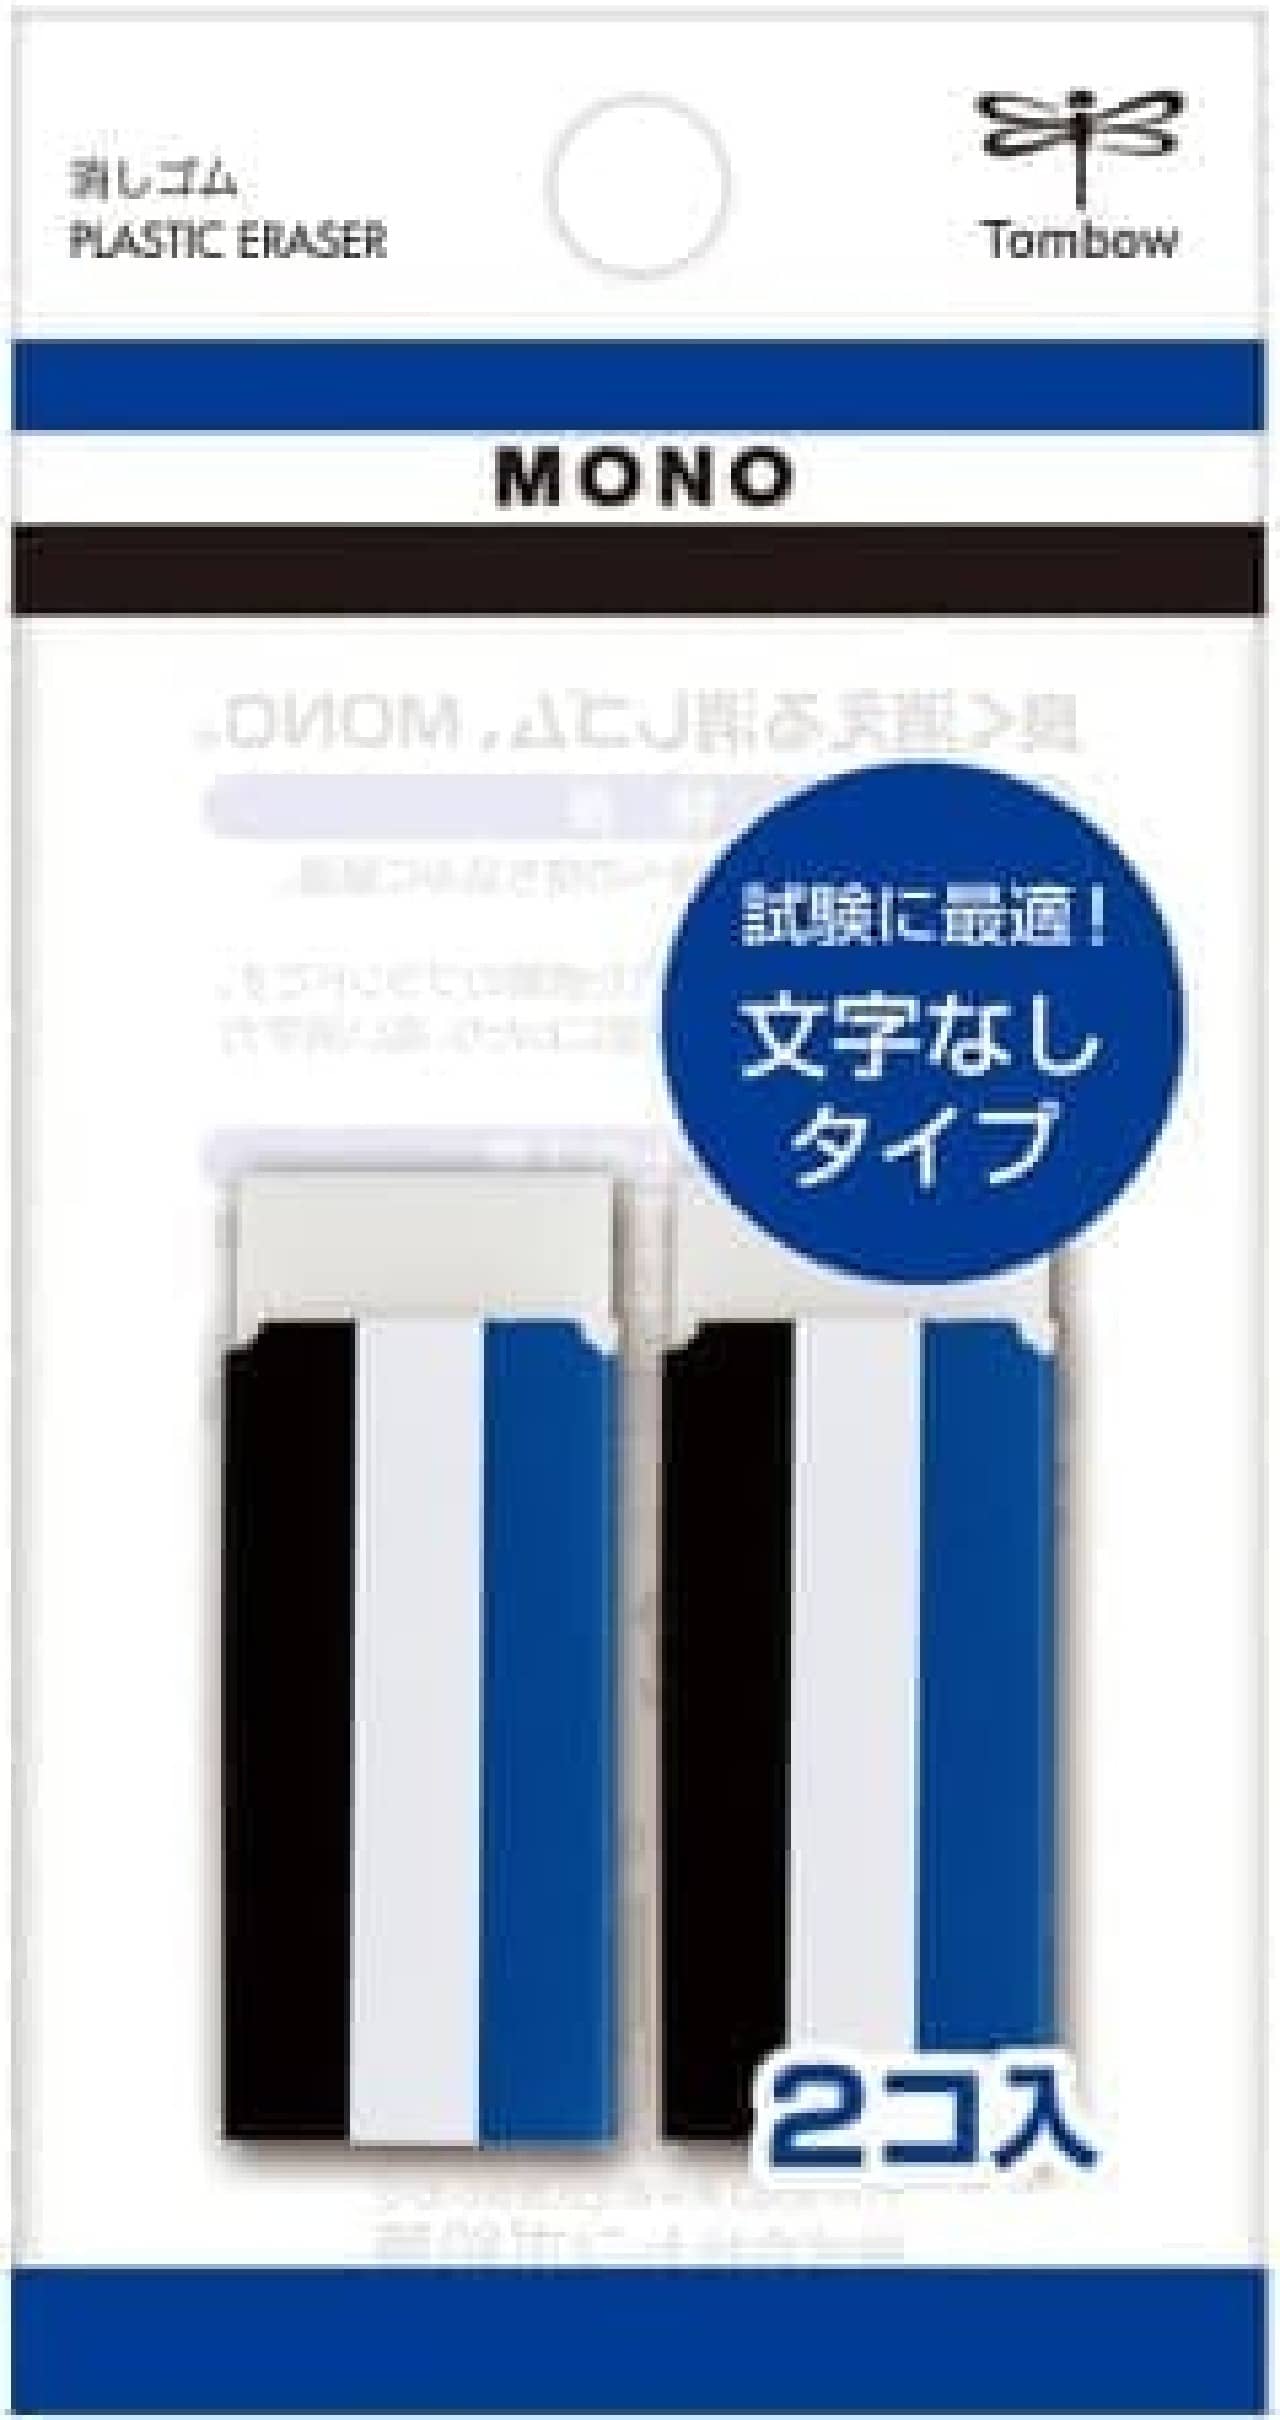 Tombow Pencil "Eraser Mono PE01 Characterless 2P Pack"